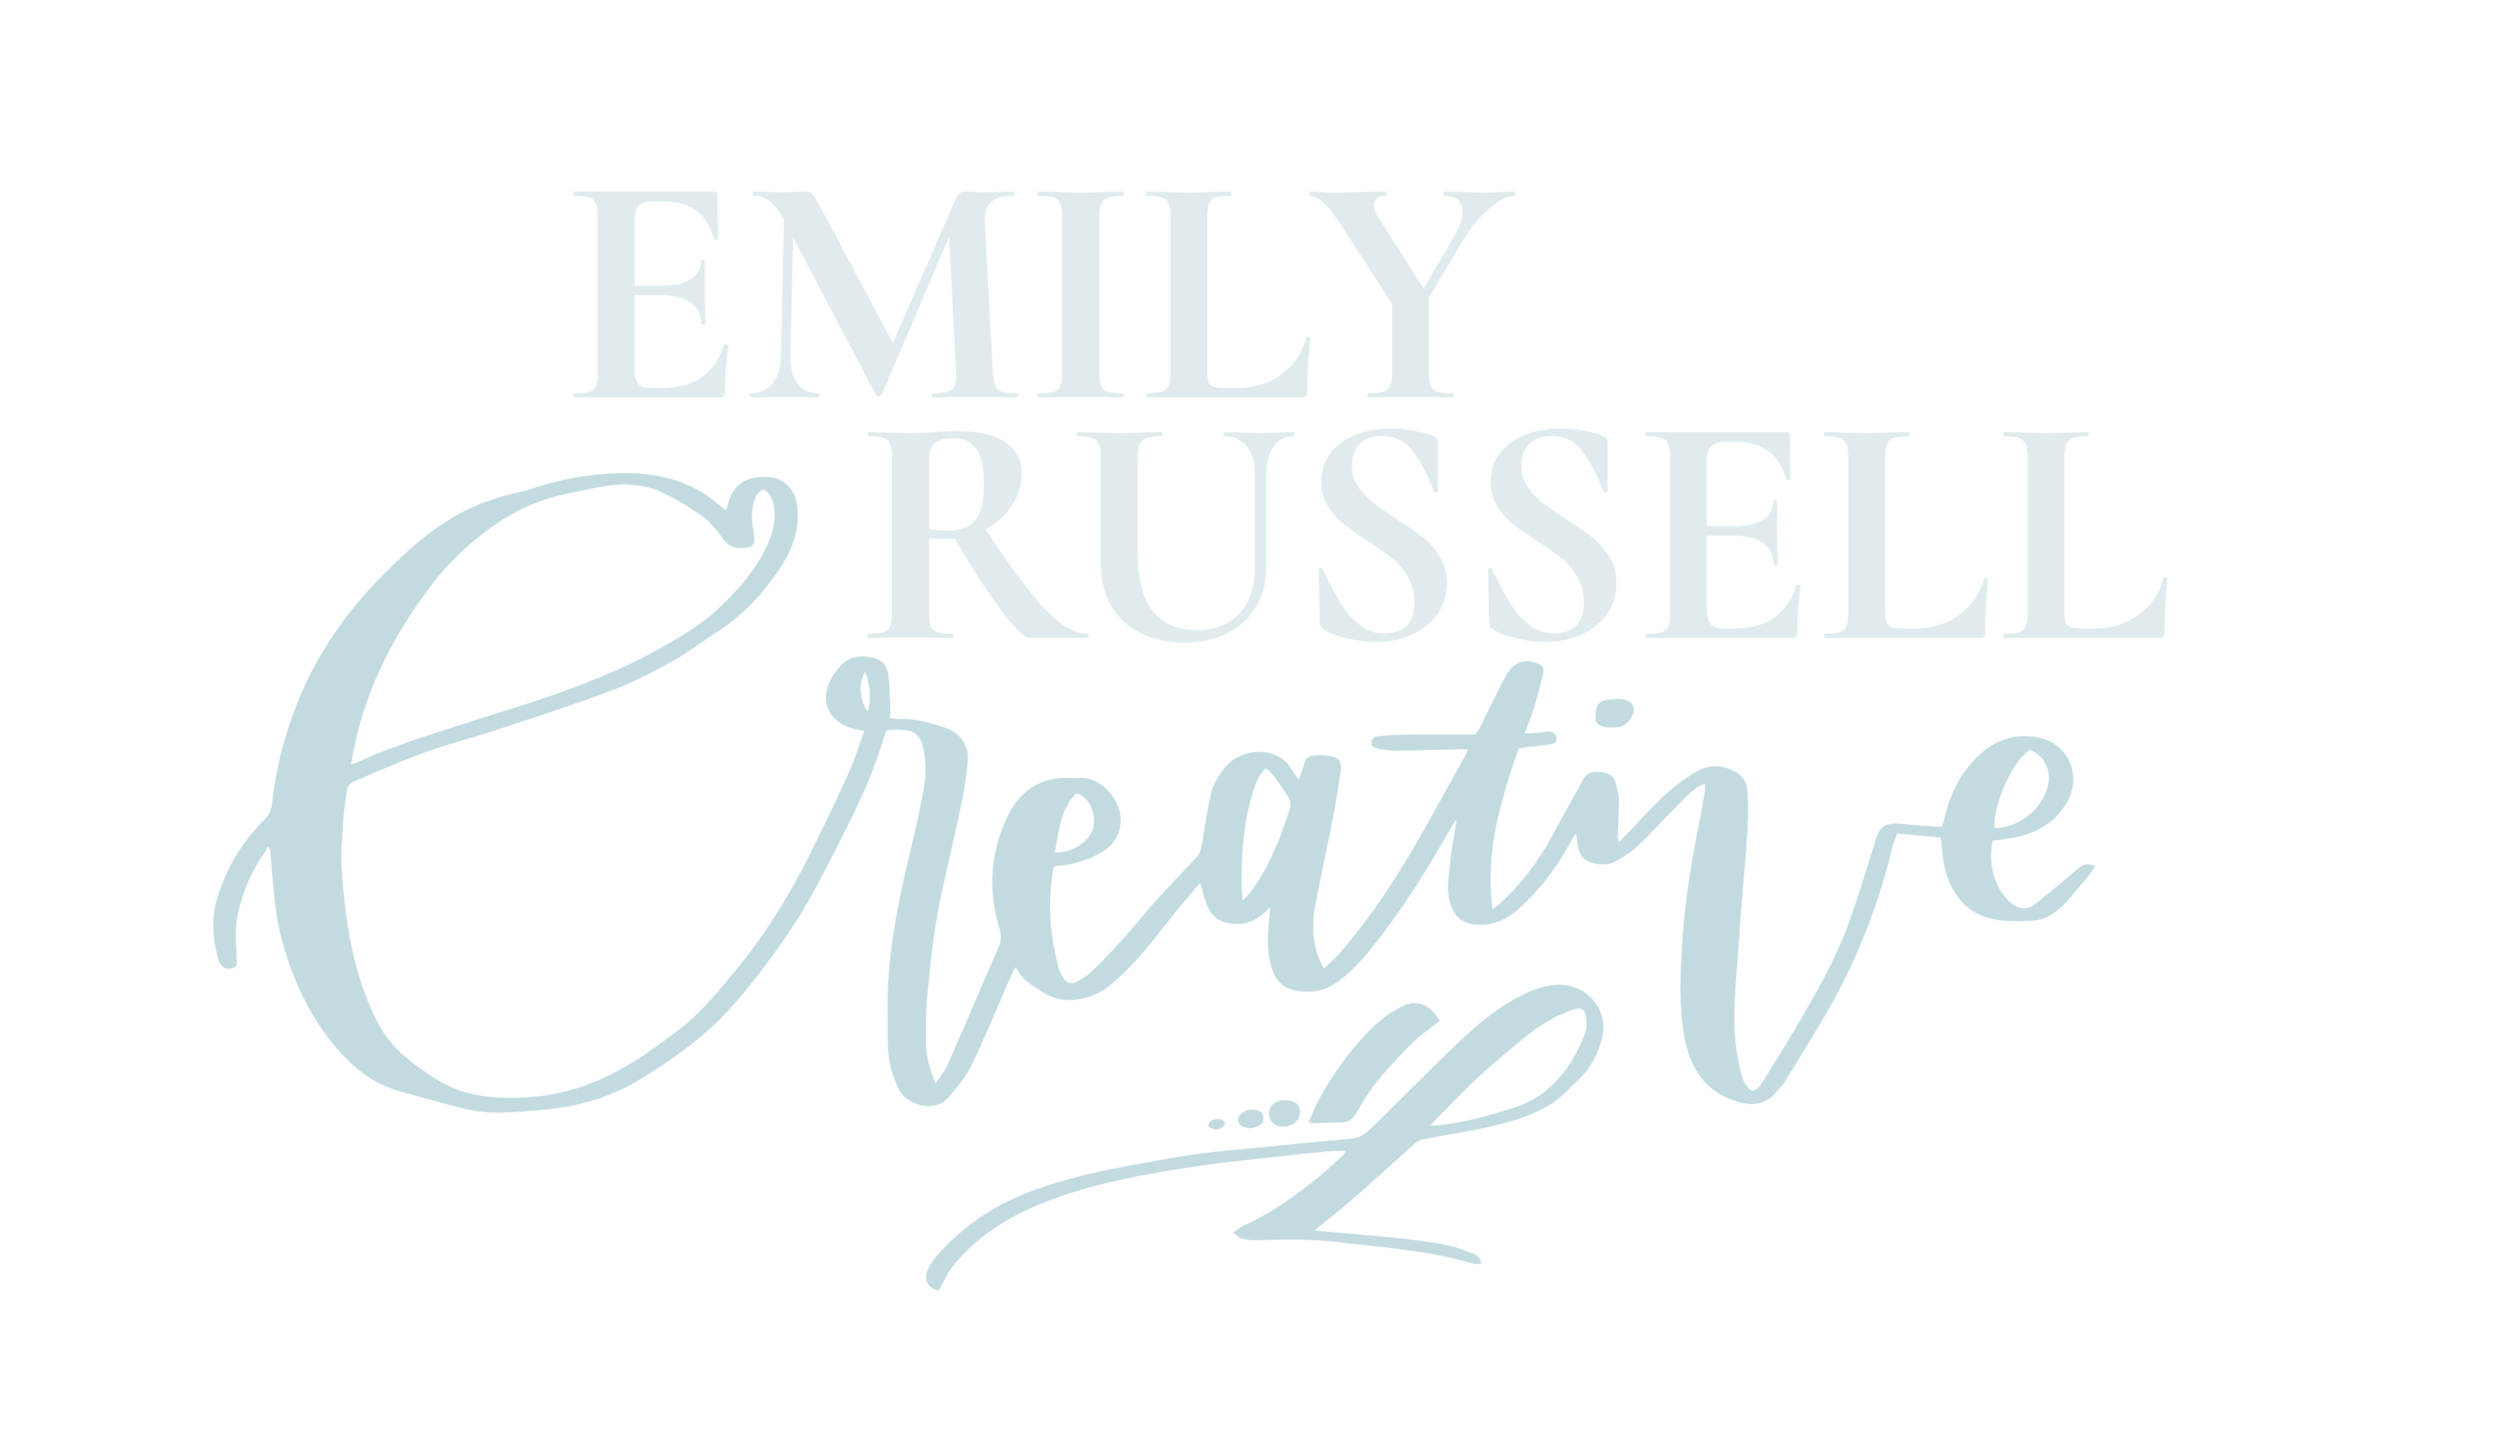 Emily Russell Creative